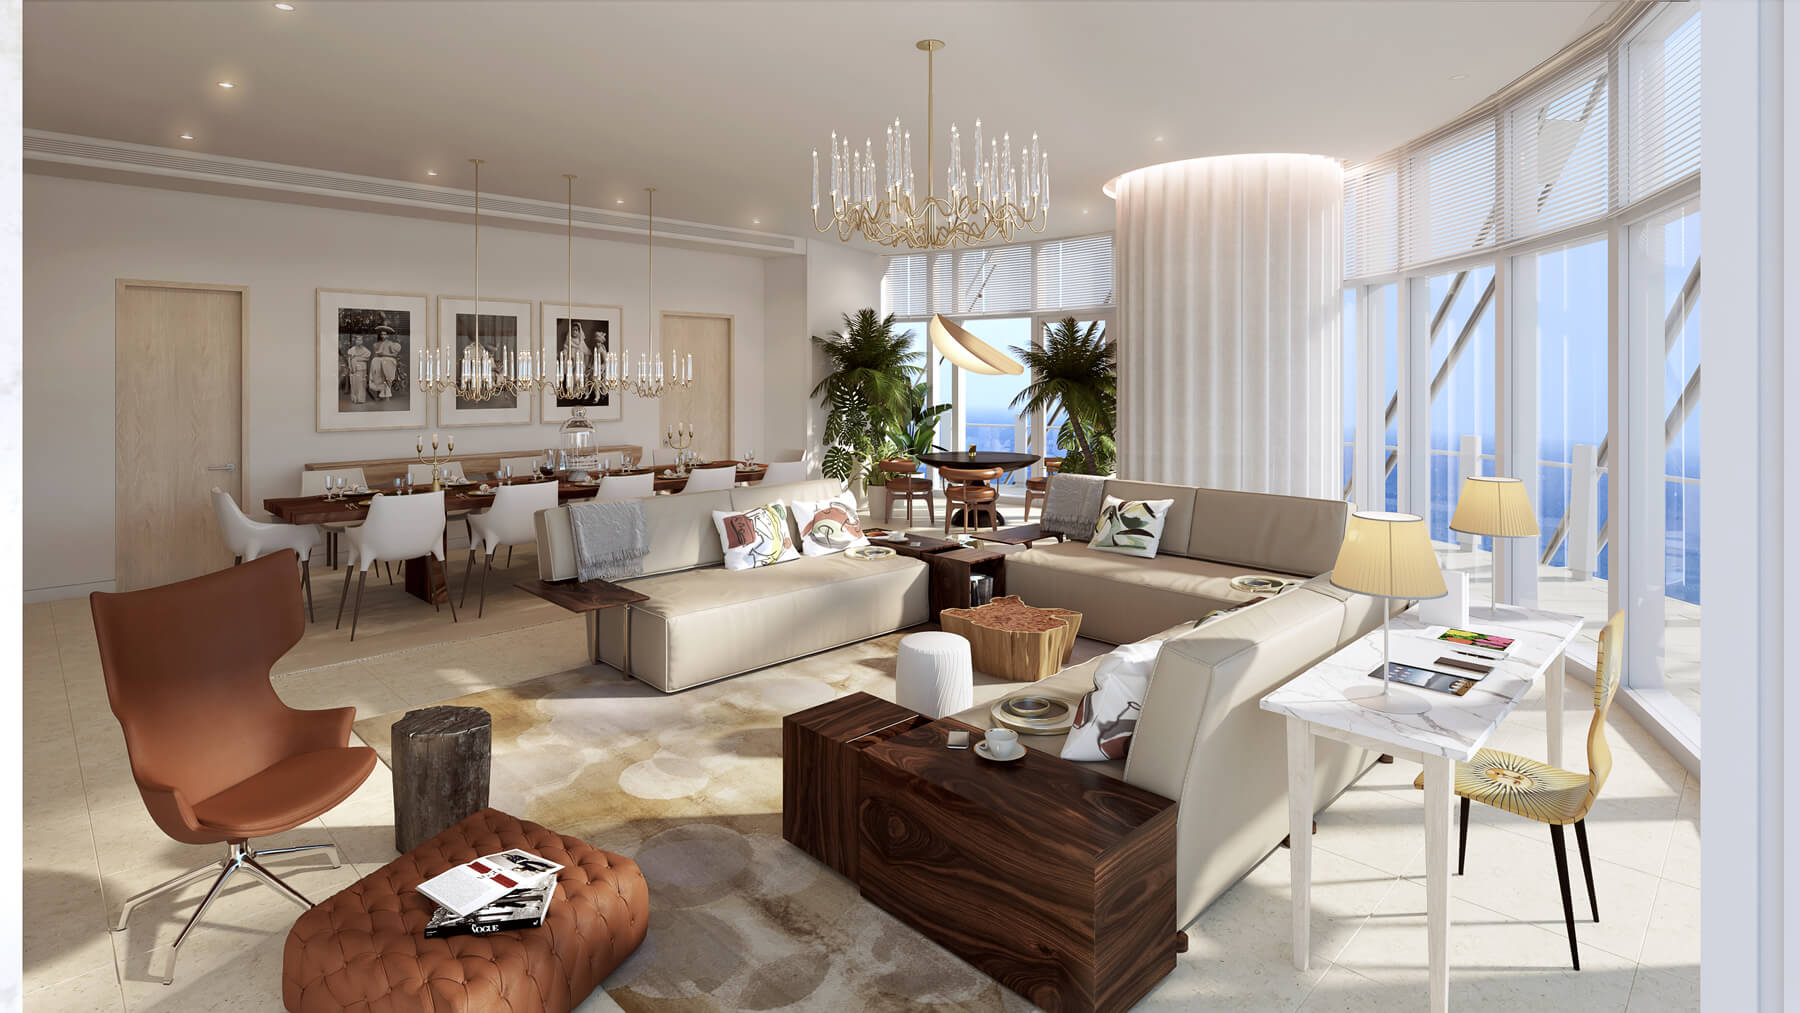 An image of a luxury apartment interior